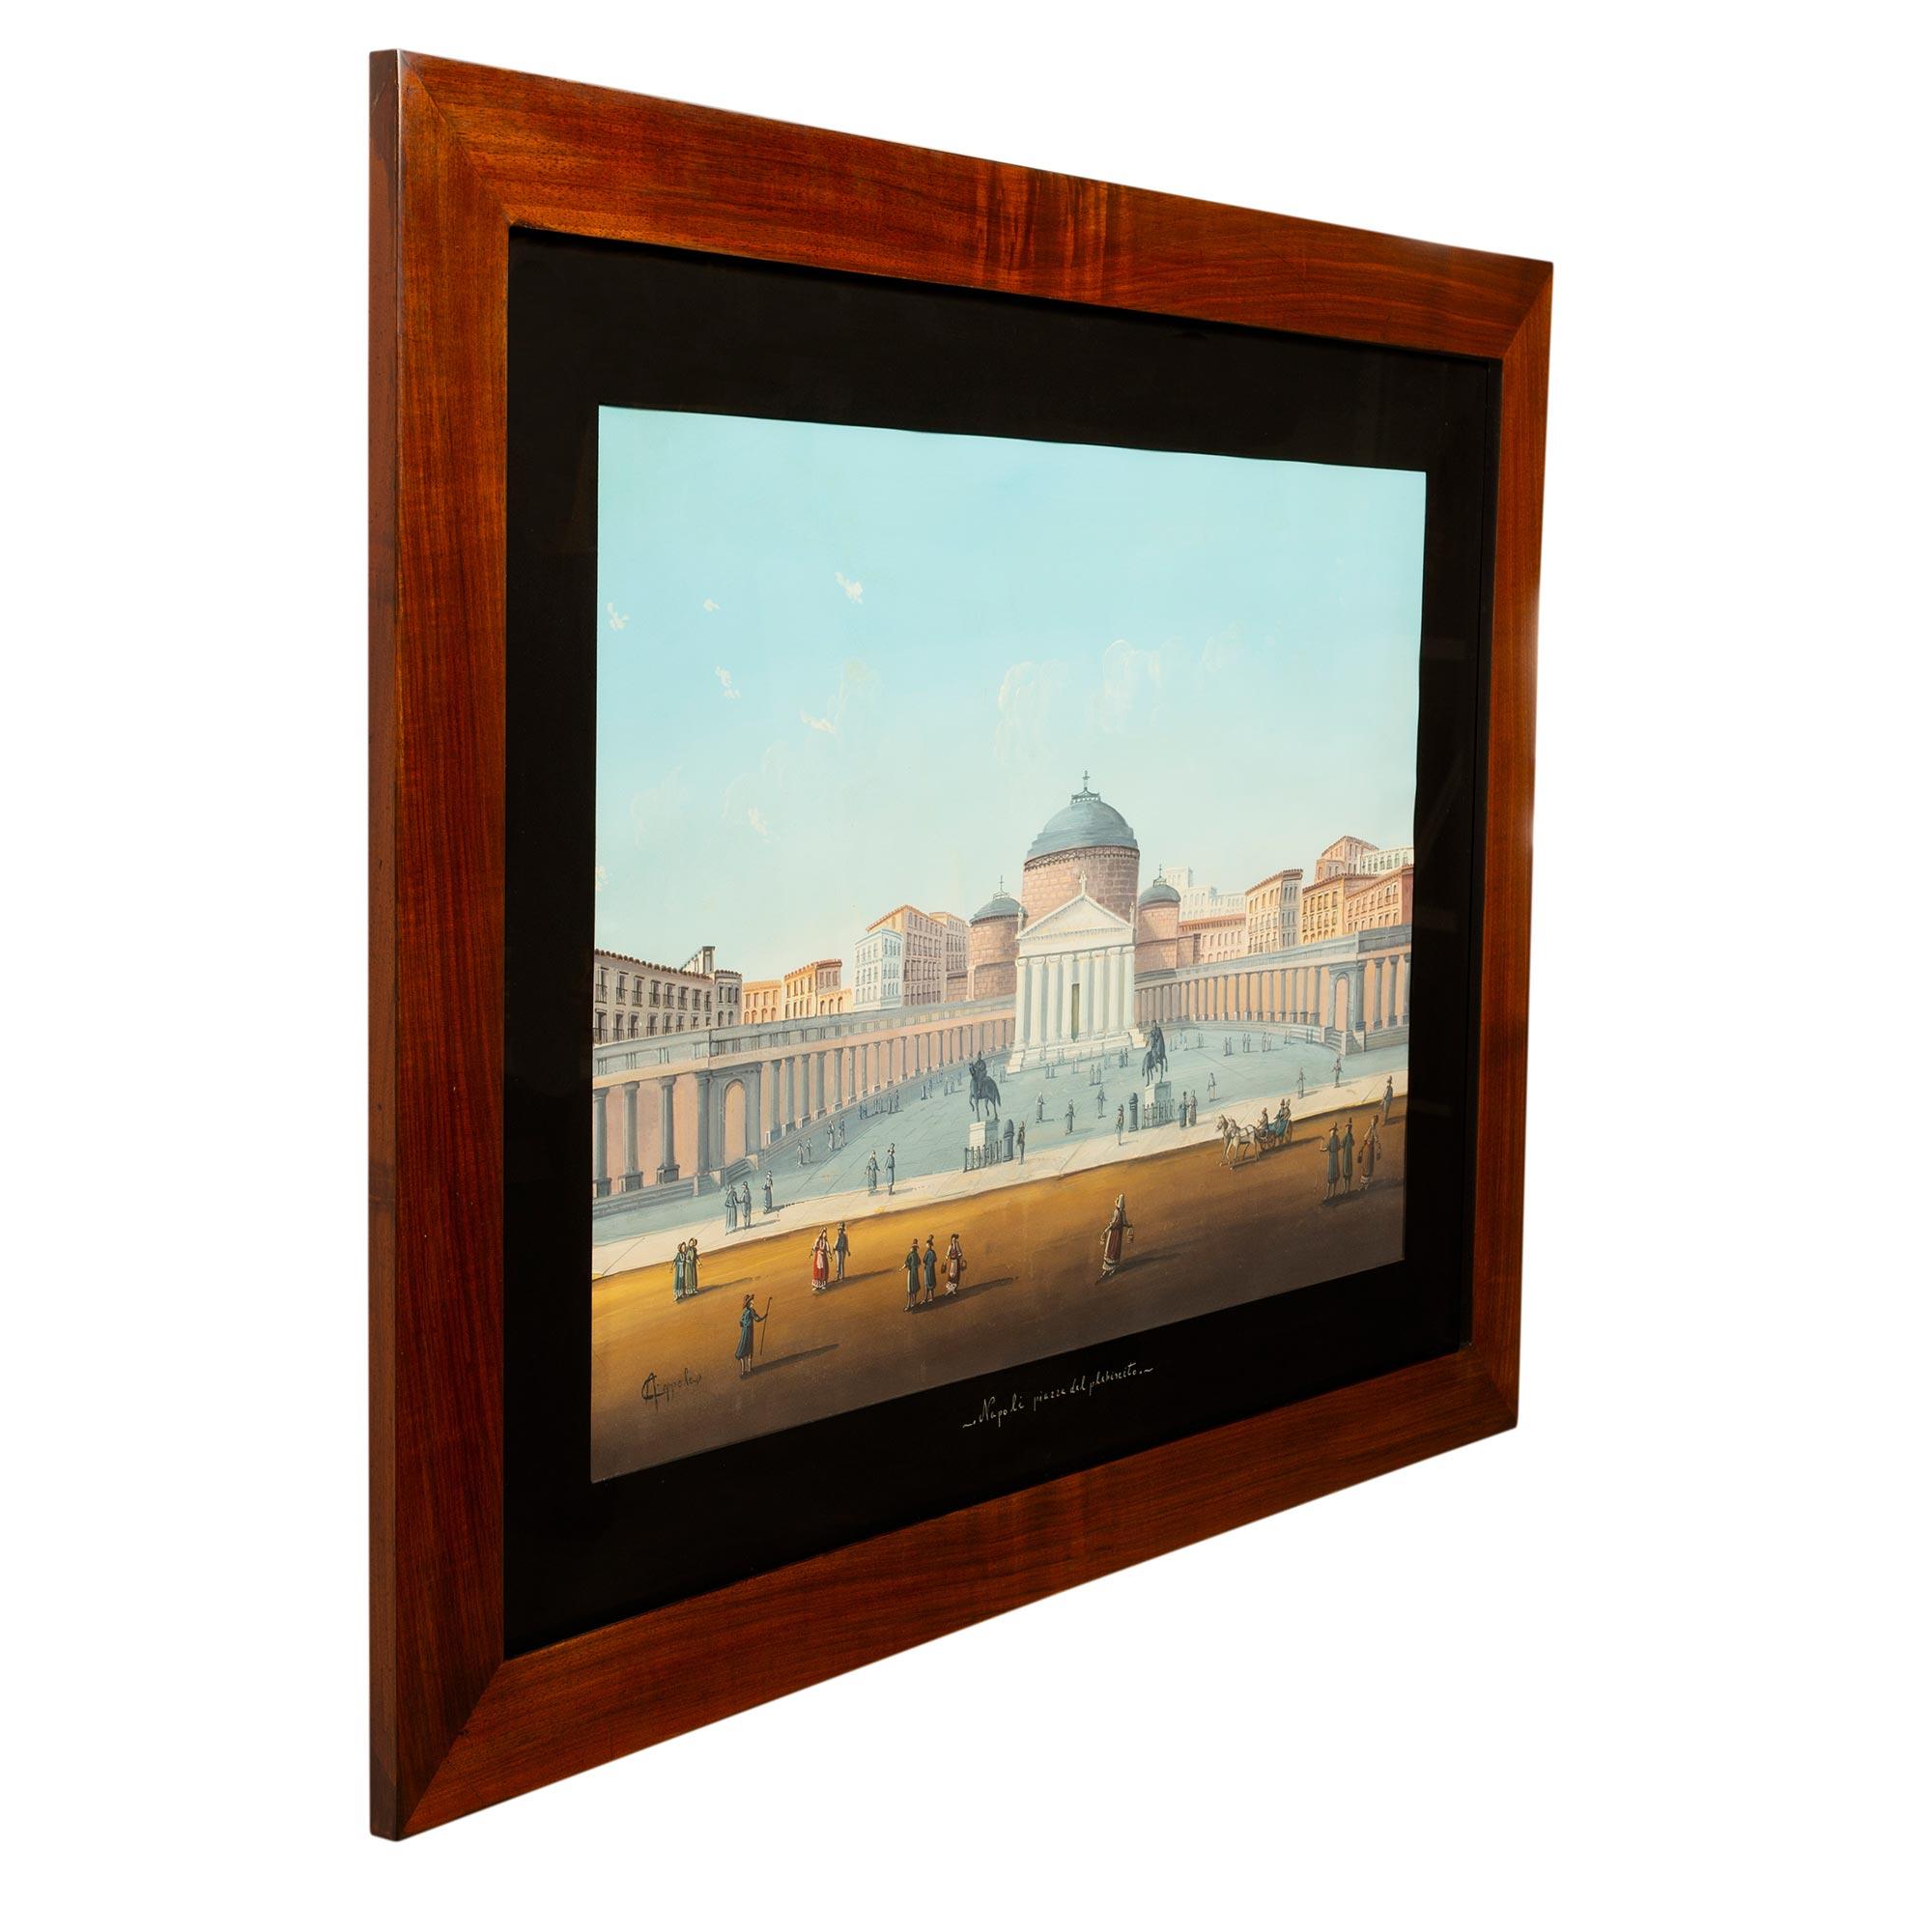 A wonderful and large scaled Italian 19th century signed gouache, framed within a rectangular mahogany frame. The richly detailed gouache is of Piazze Del Plebiscito, the famous public square in Naples. The Piazza is shown with a many figures